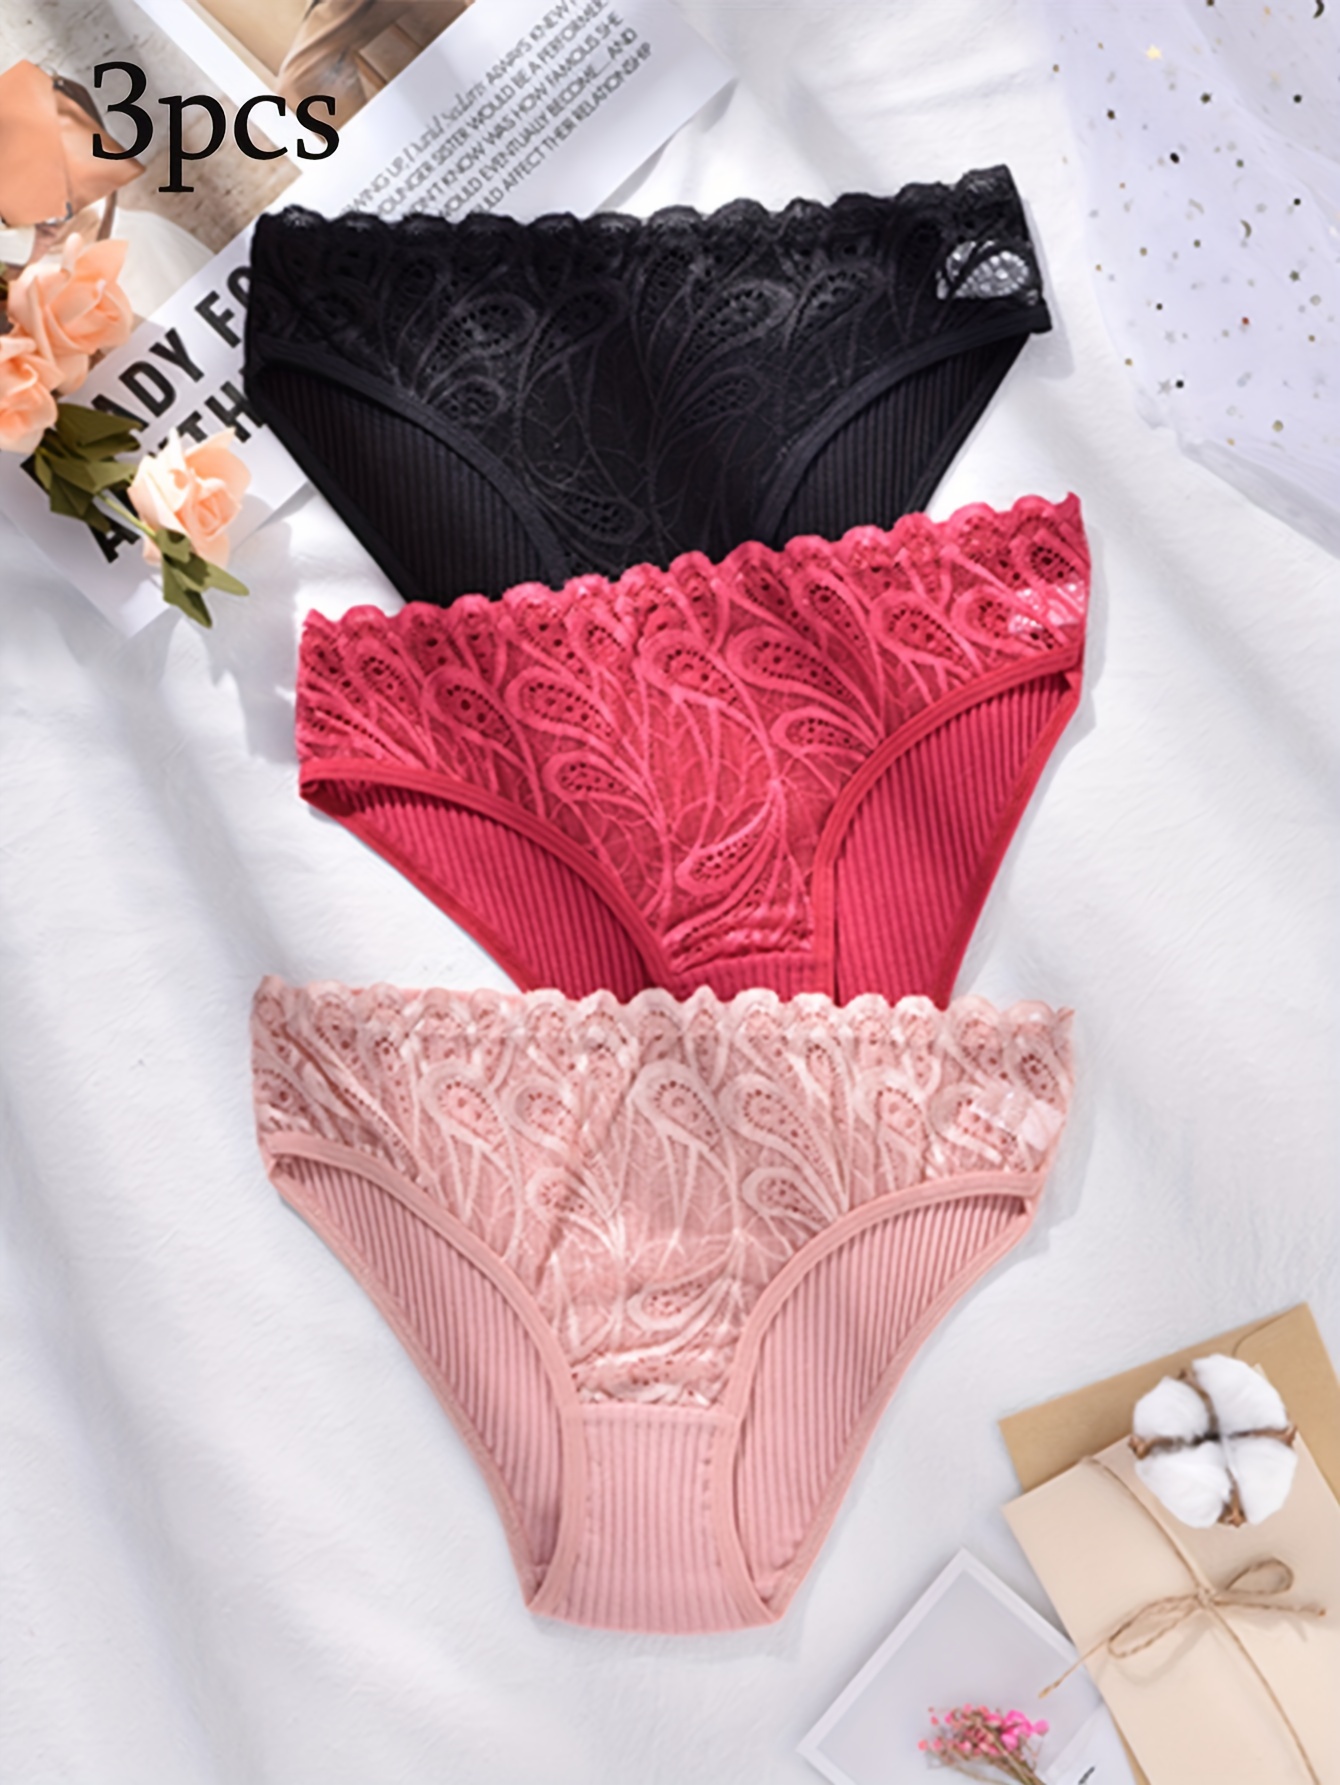 Contrast Lace Panty  Calzones mujer, Ropa interior para chicos, Ropa  caliente